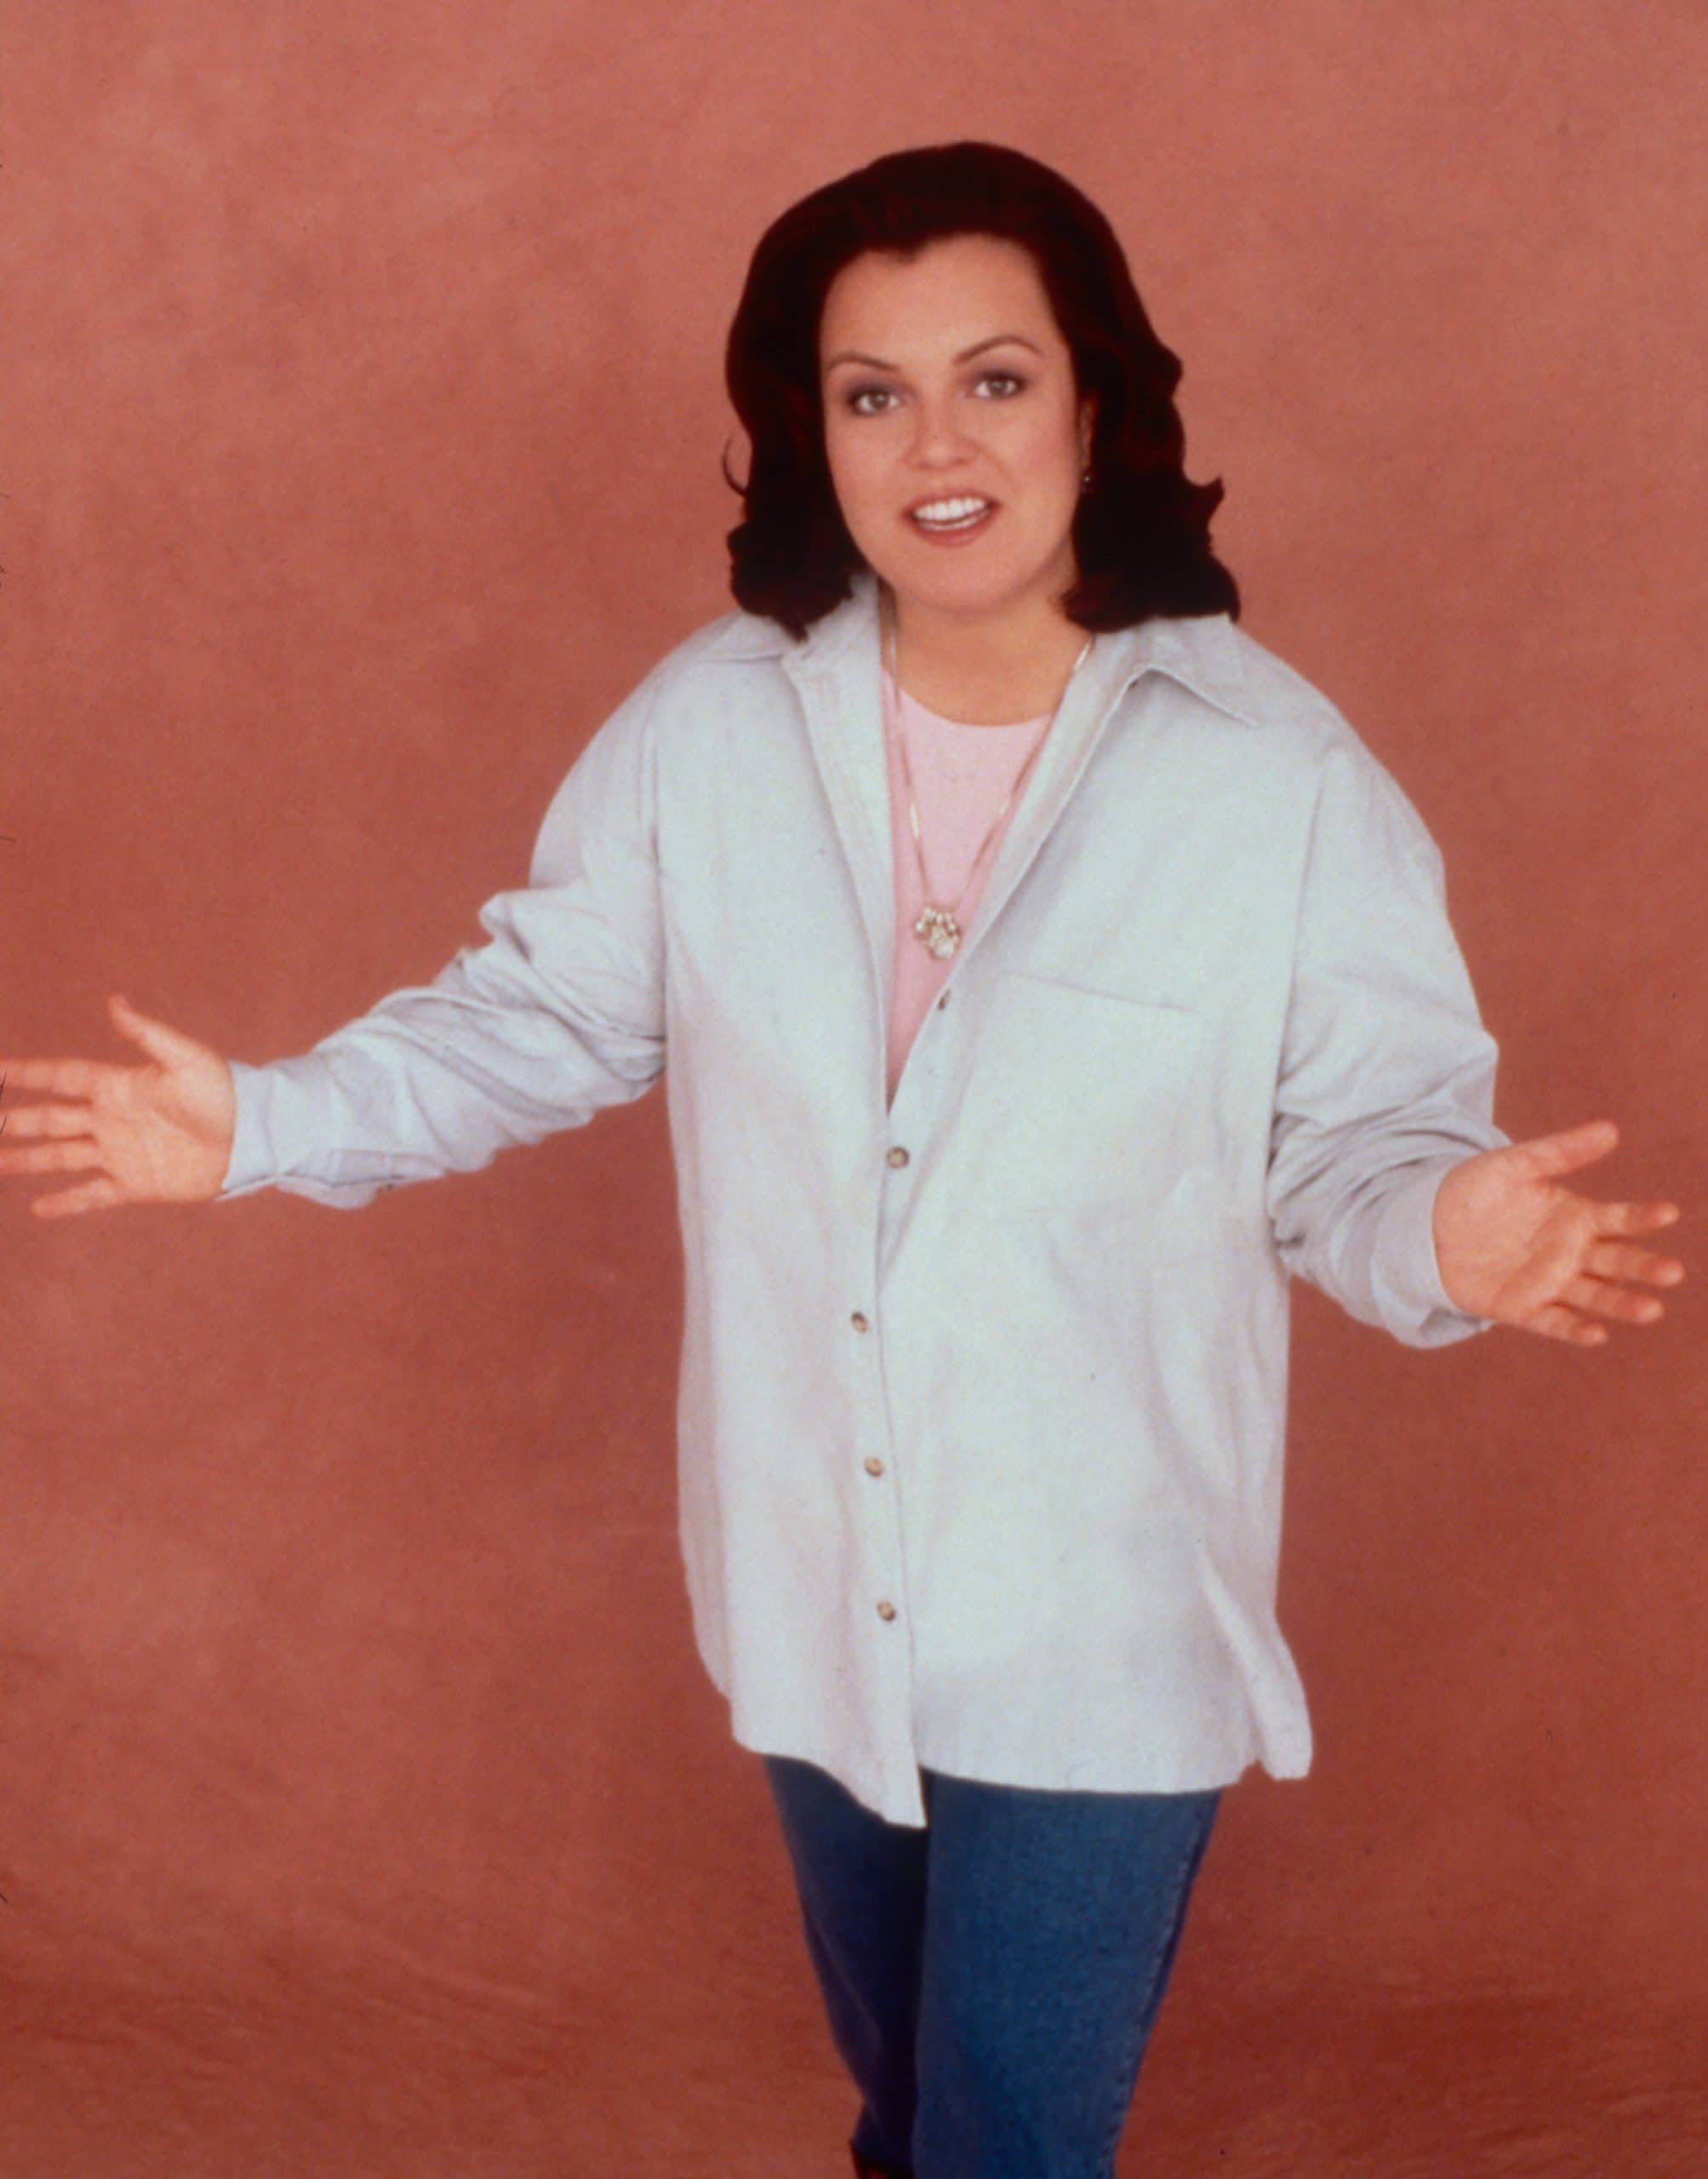 THE ROSIE O'DONNELL SHOW, Rosie O'Donnell, 1996-2002